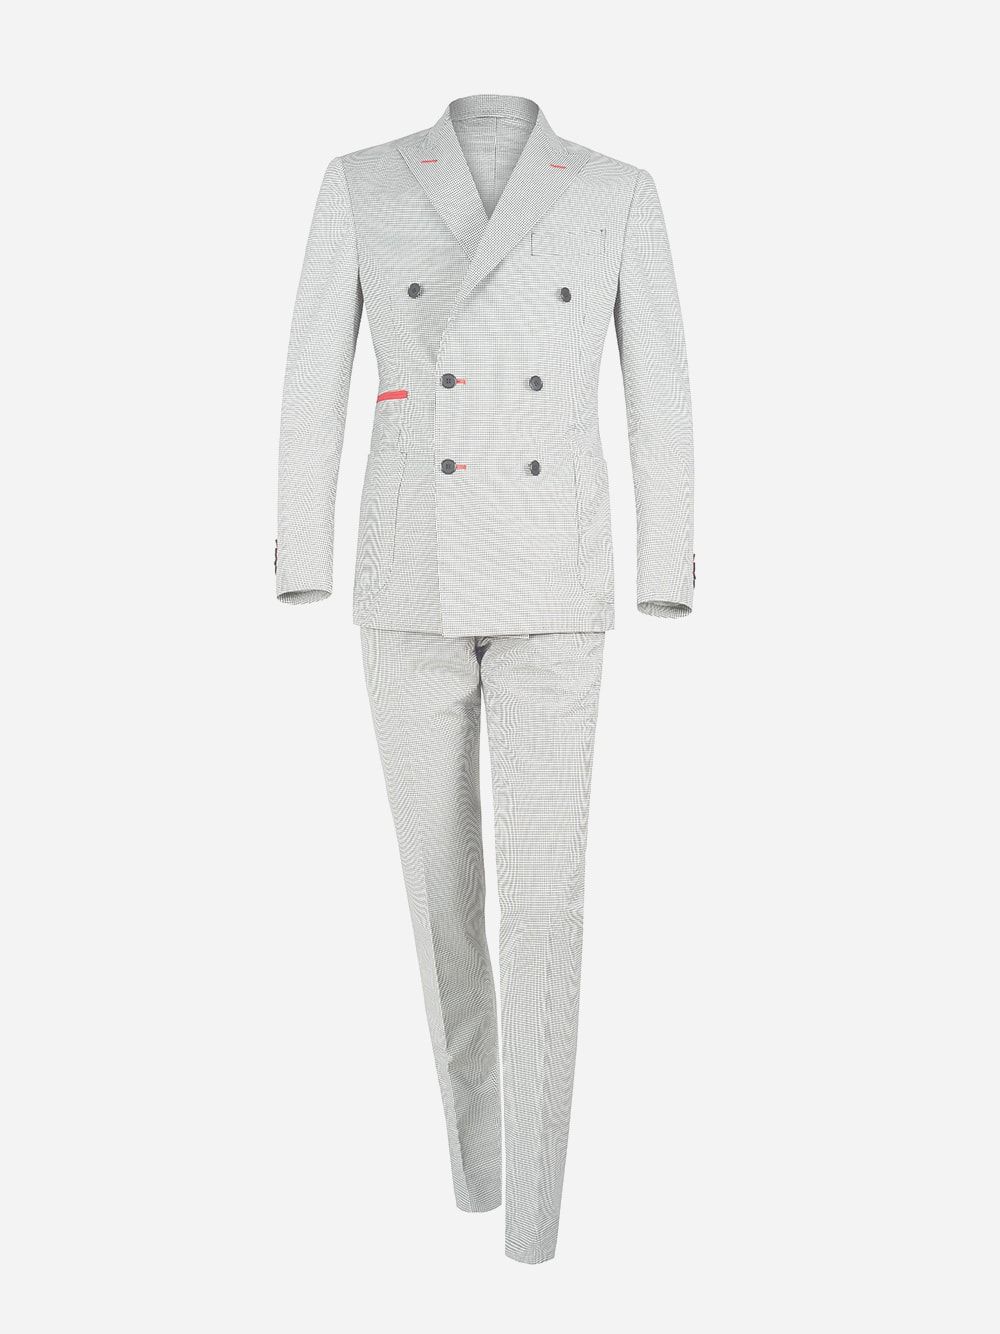 Black and White Vichy Suit | Nair Xavier 